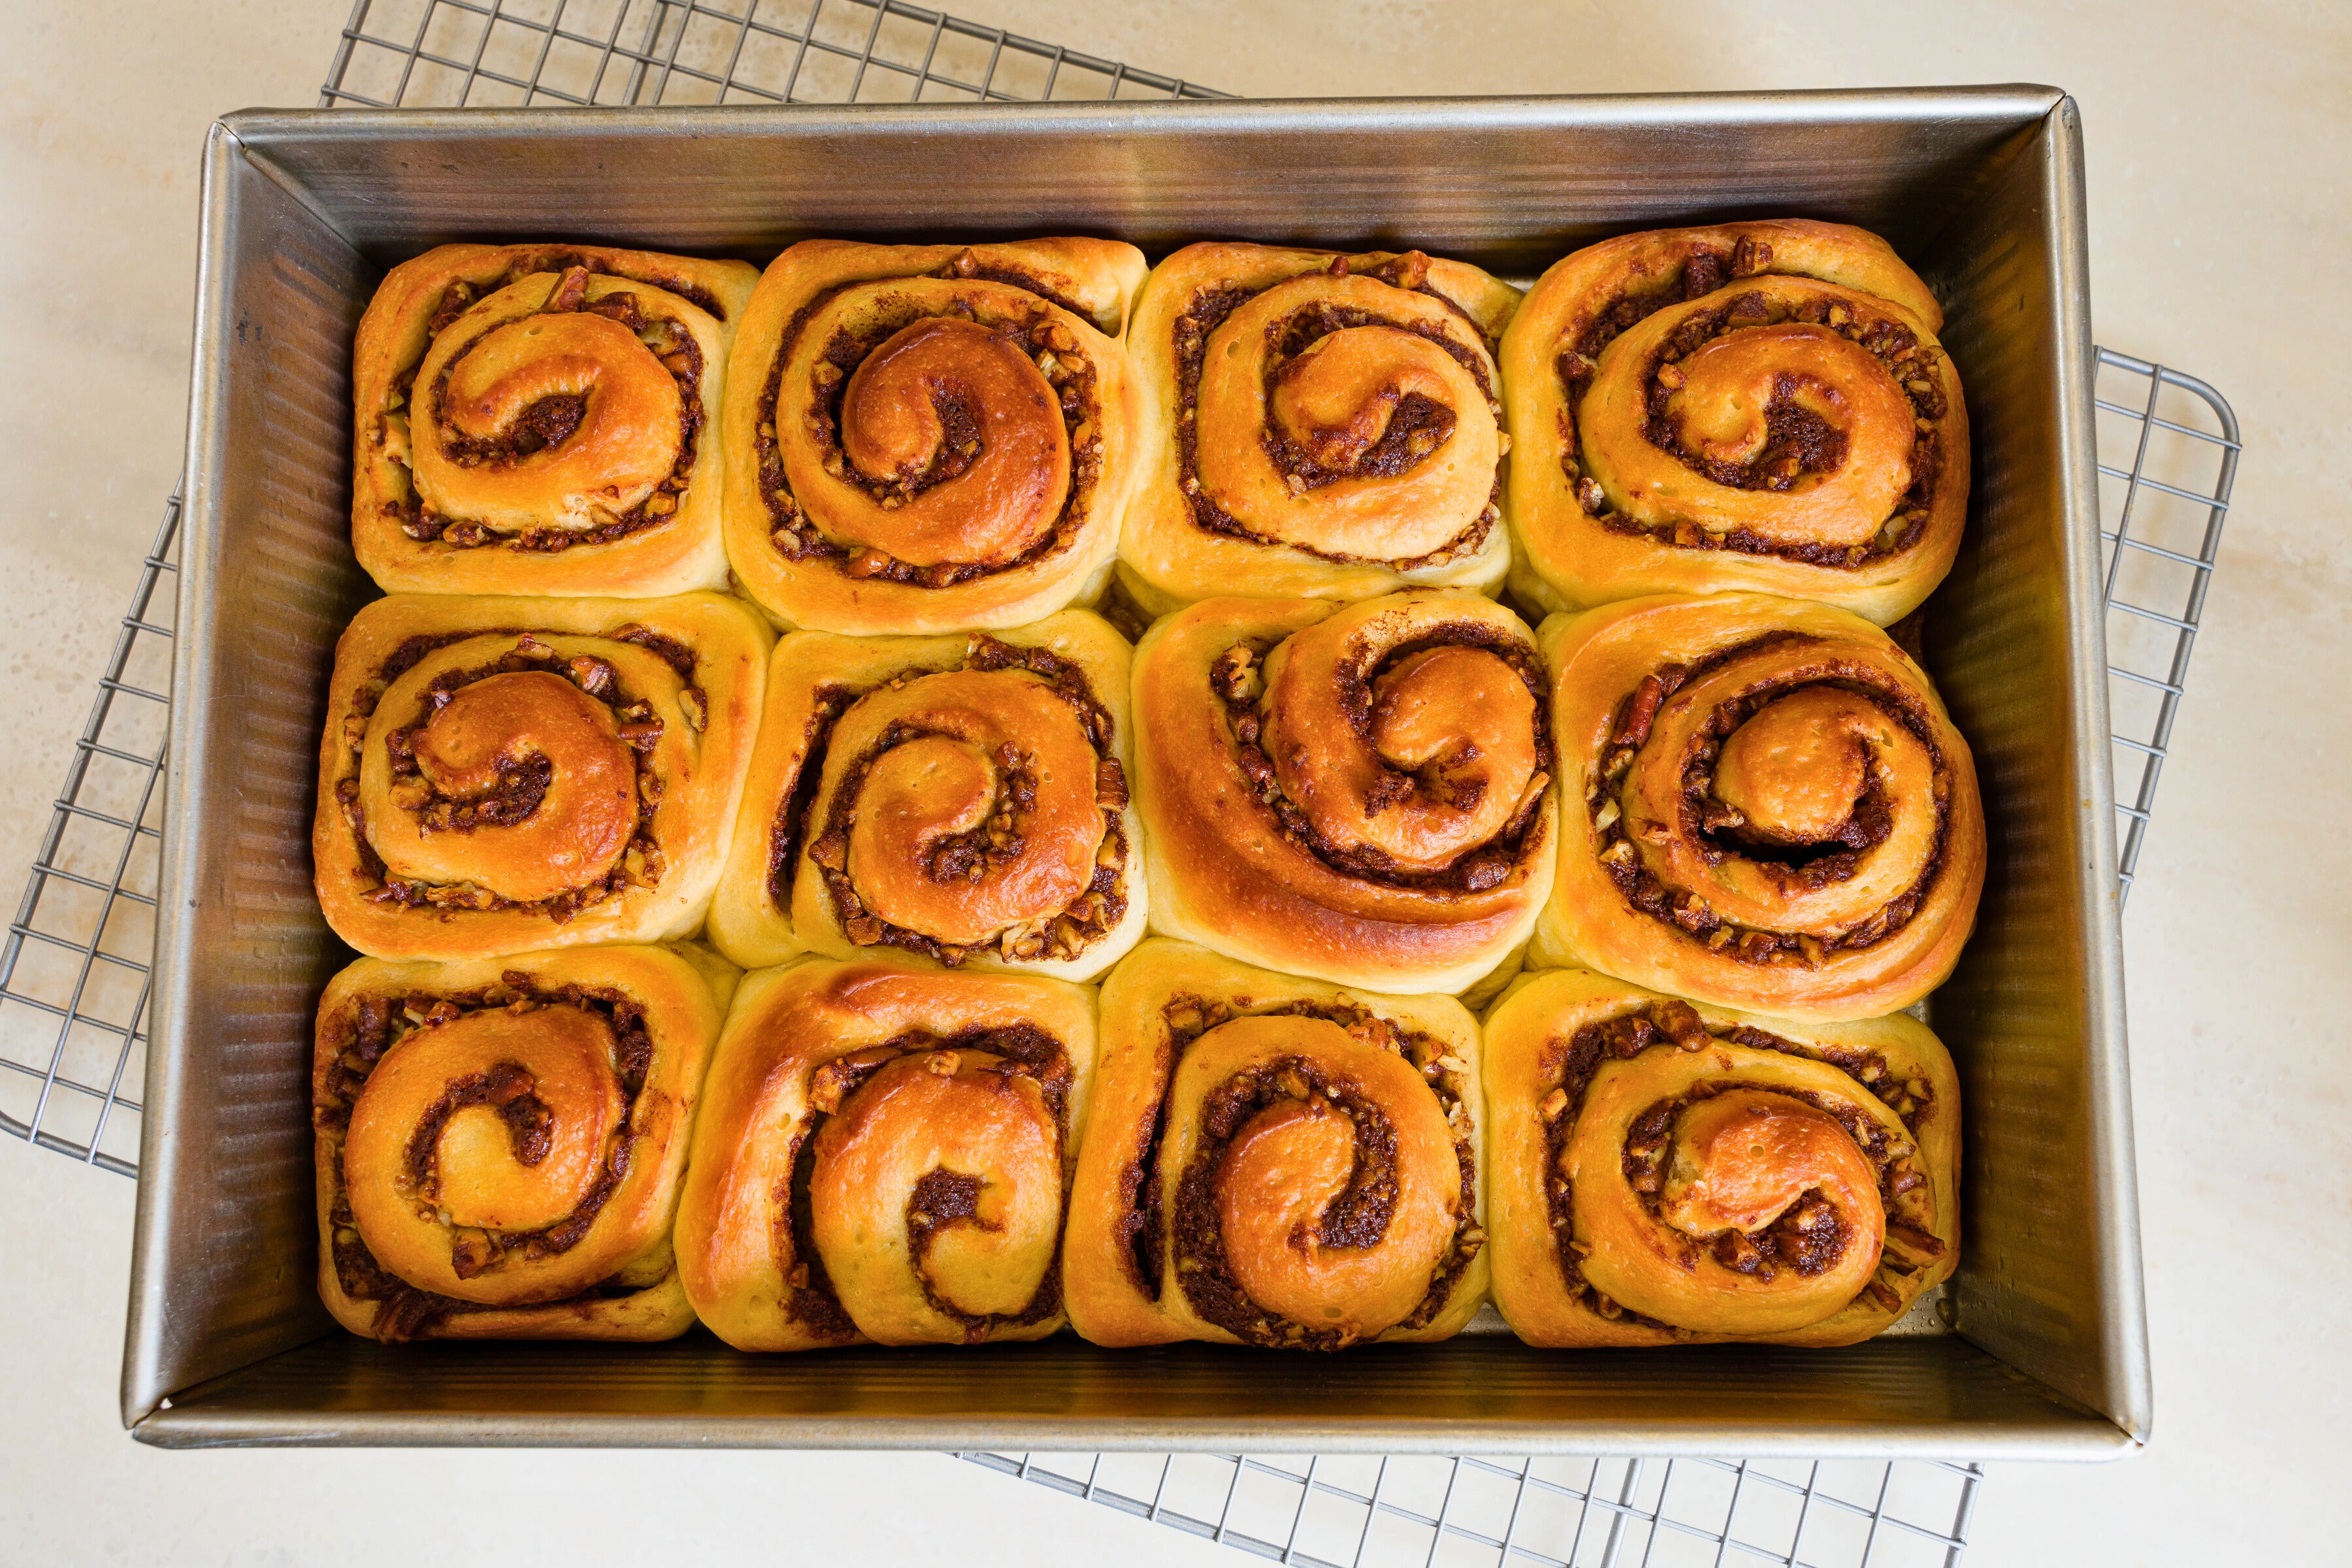 A pan of just baked cinnamon rolls just pulled from the oven sitting on a cooling rack